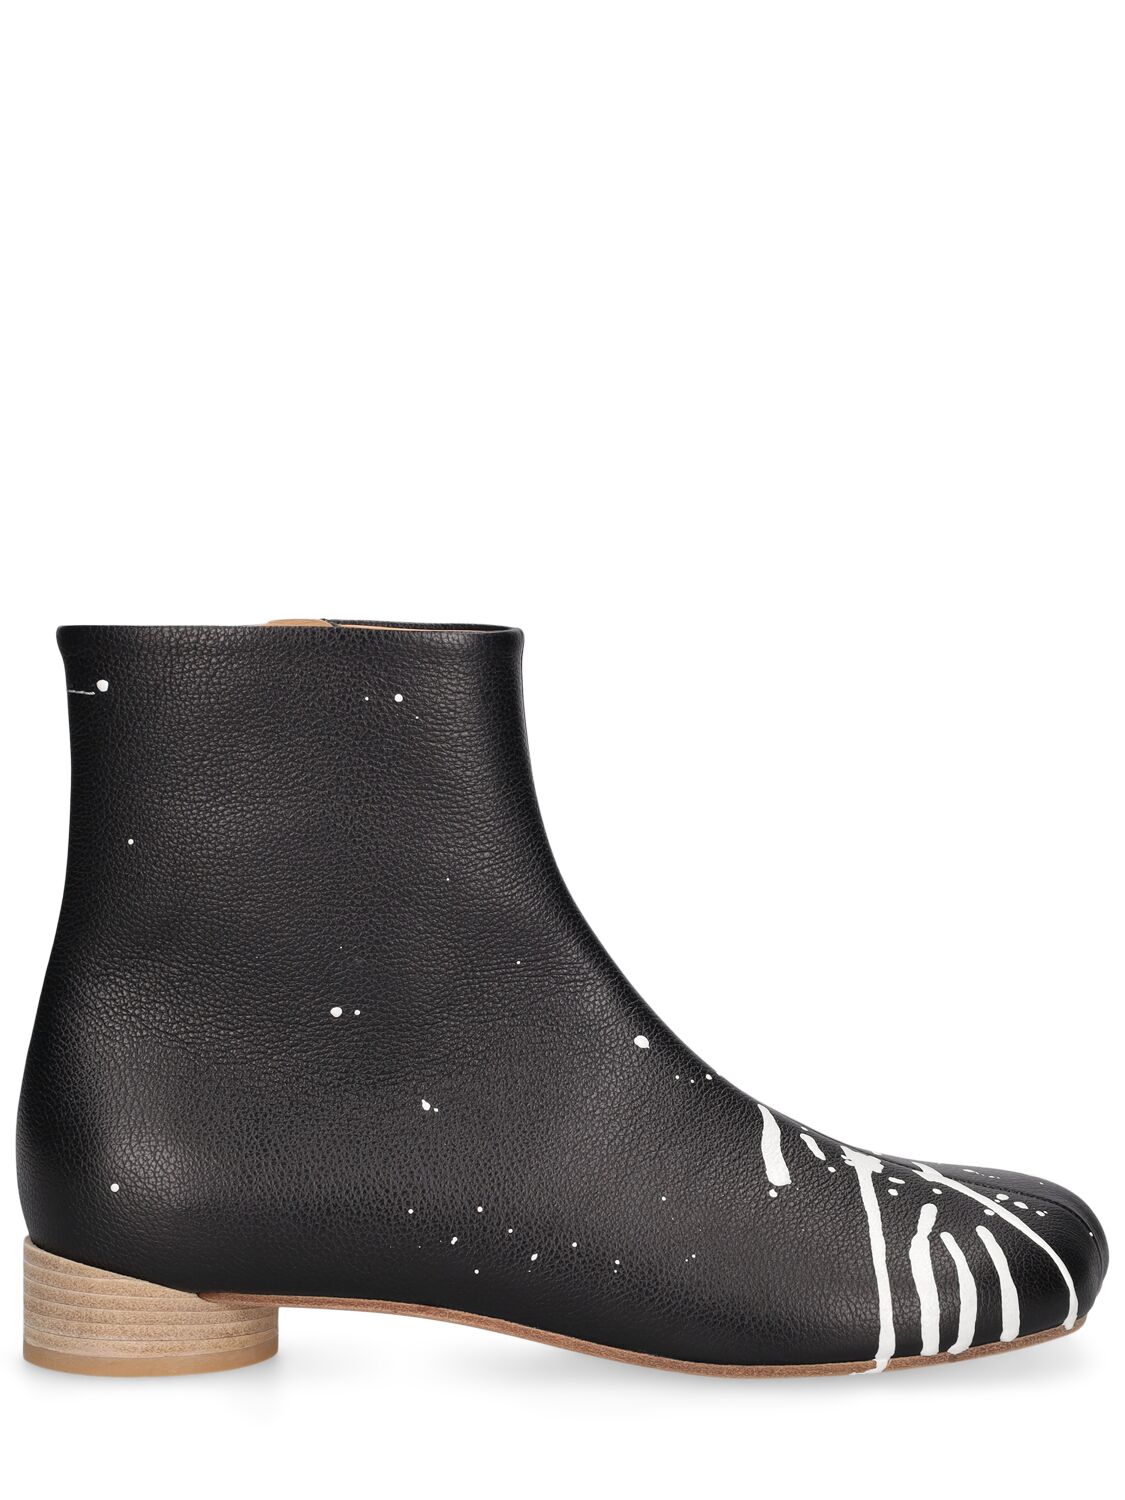 Mm6 Maison Margiela 30mm Leather Ankle Boots In Black